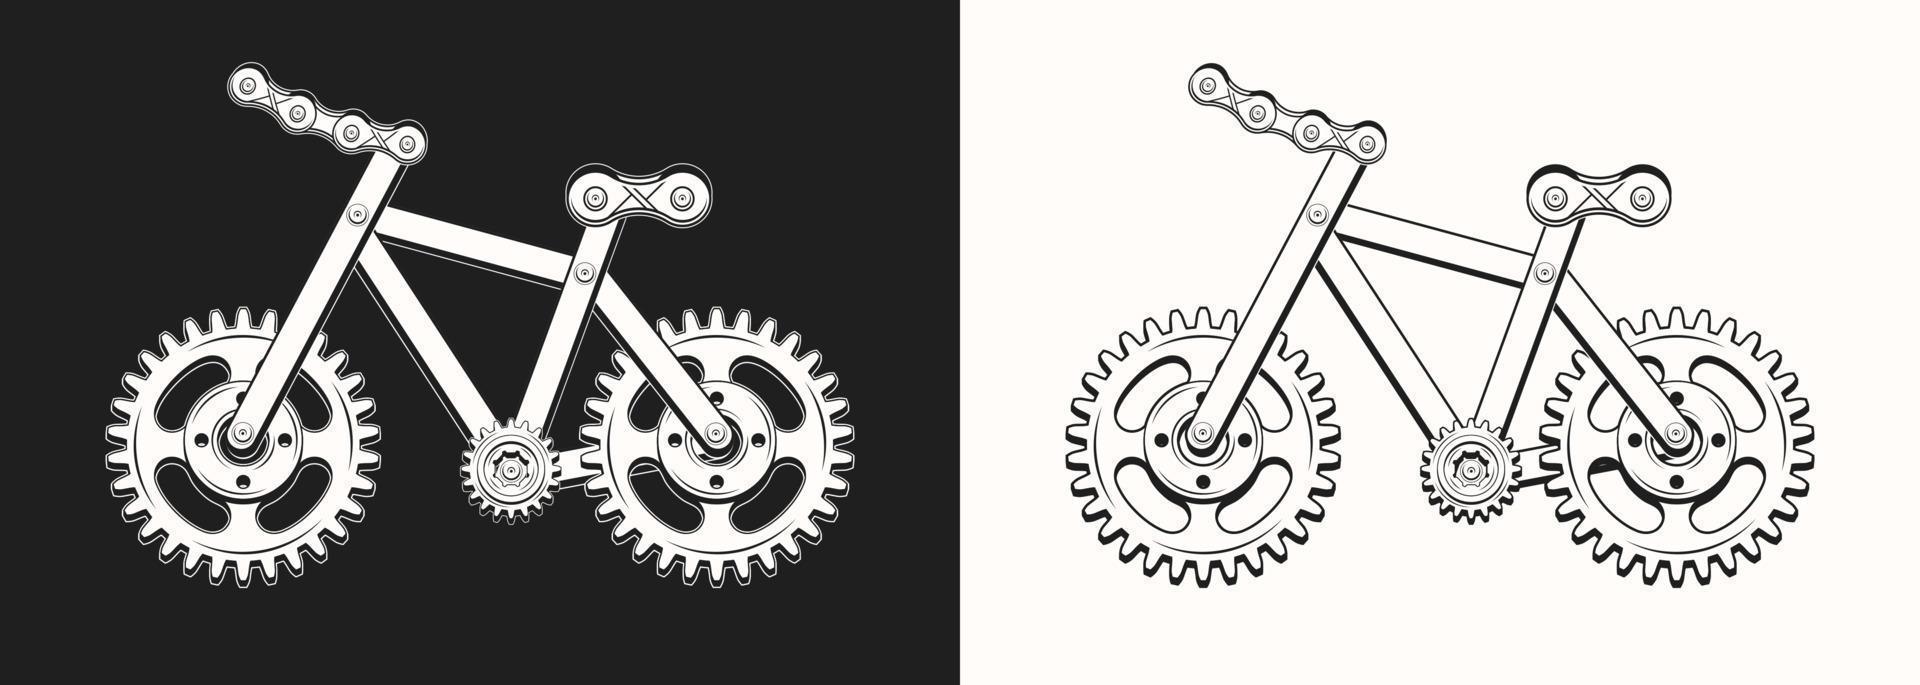 Bicycle made with gears, metal rails, rivets. Monochrome badge for repair bike service in vintage steampunk style. Good for craft design. vector